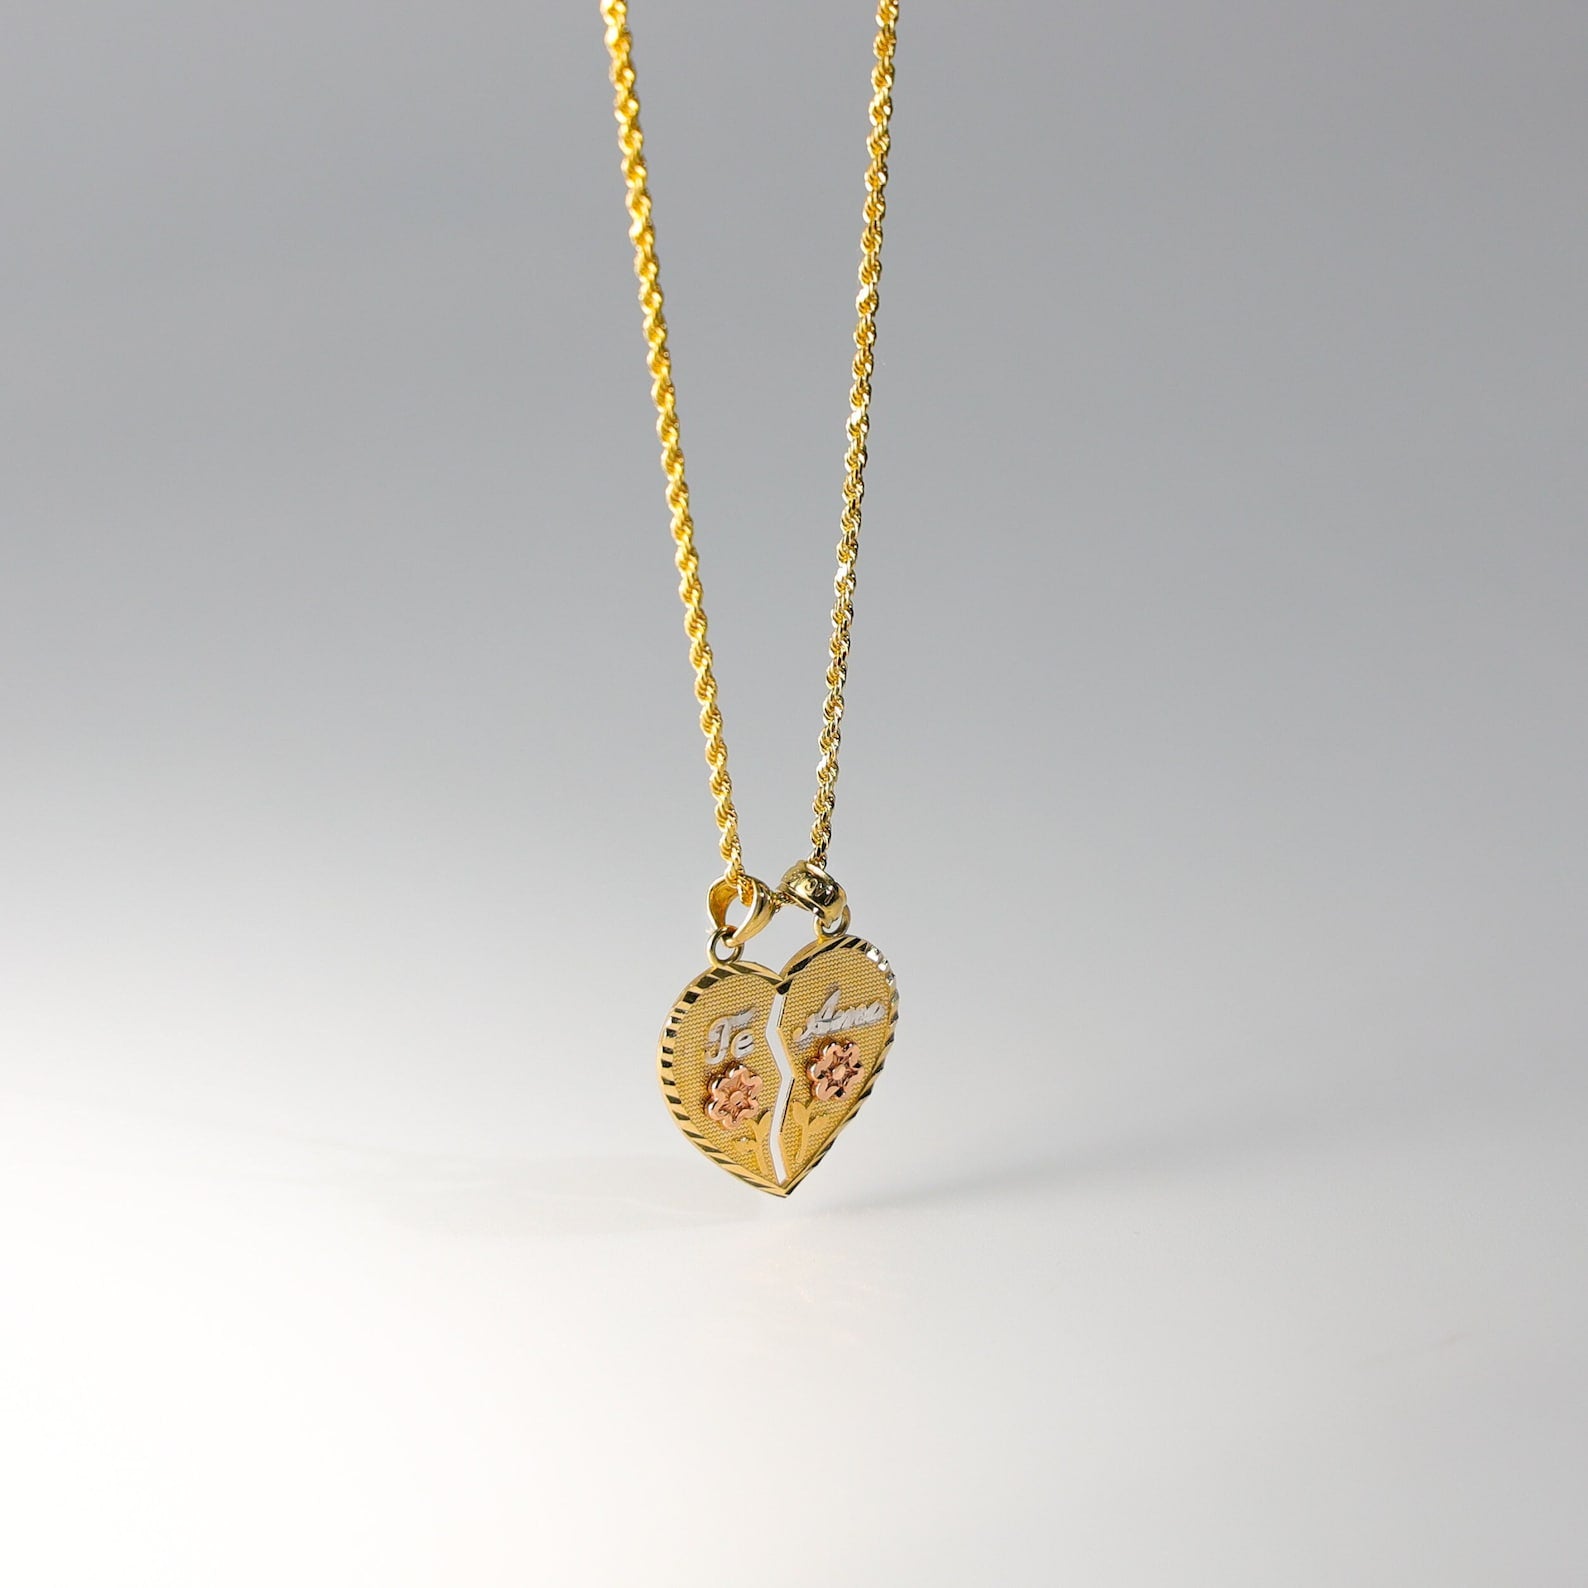 Solid Gold Te Amo Heart Pendant - Charlie & Co. Jewelry